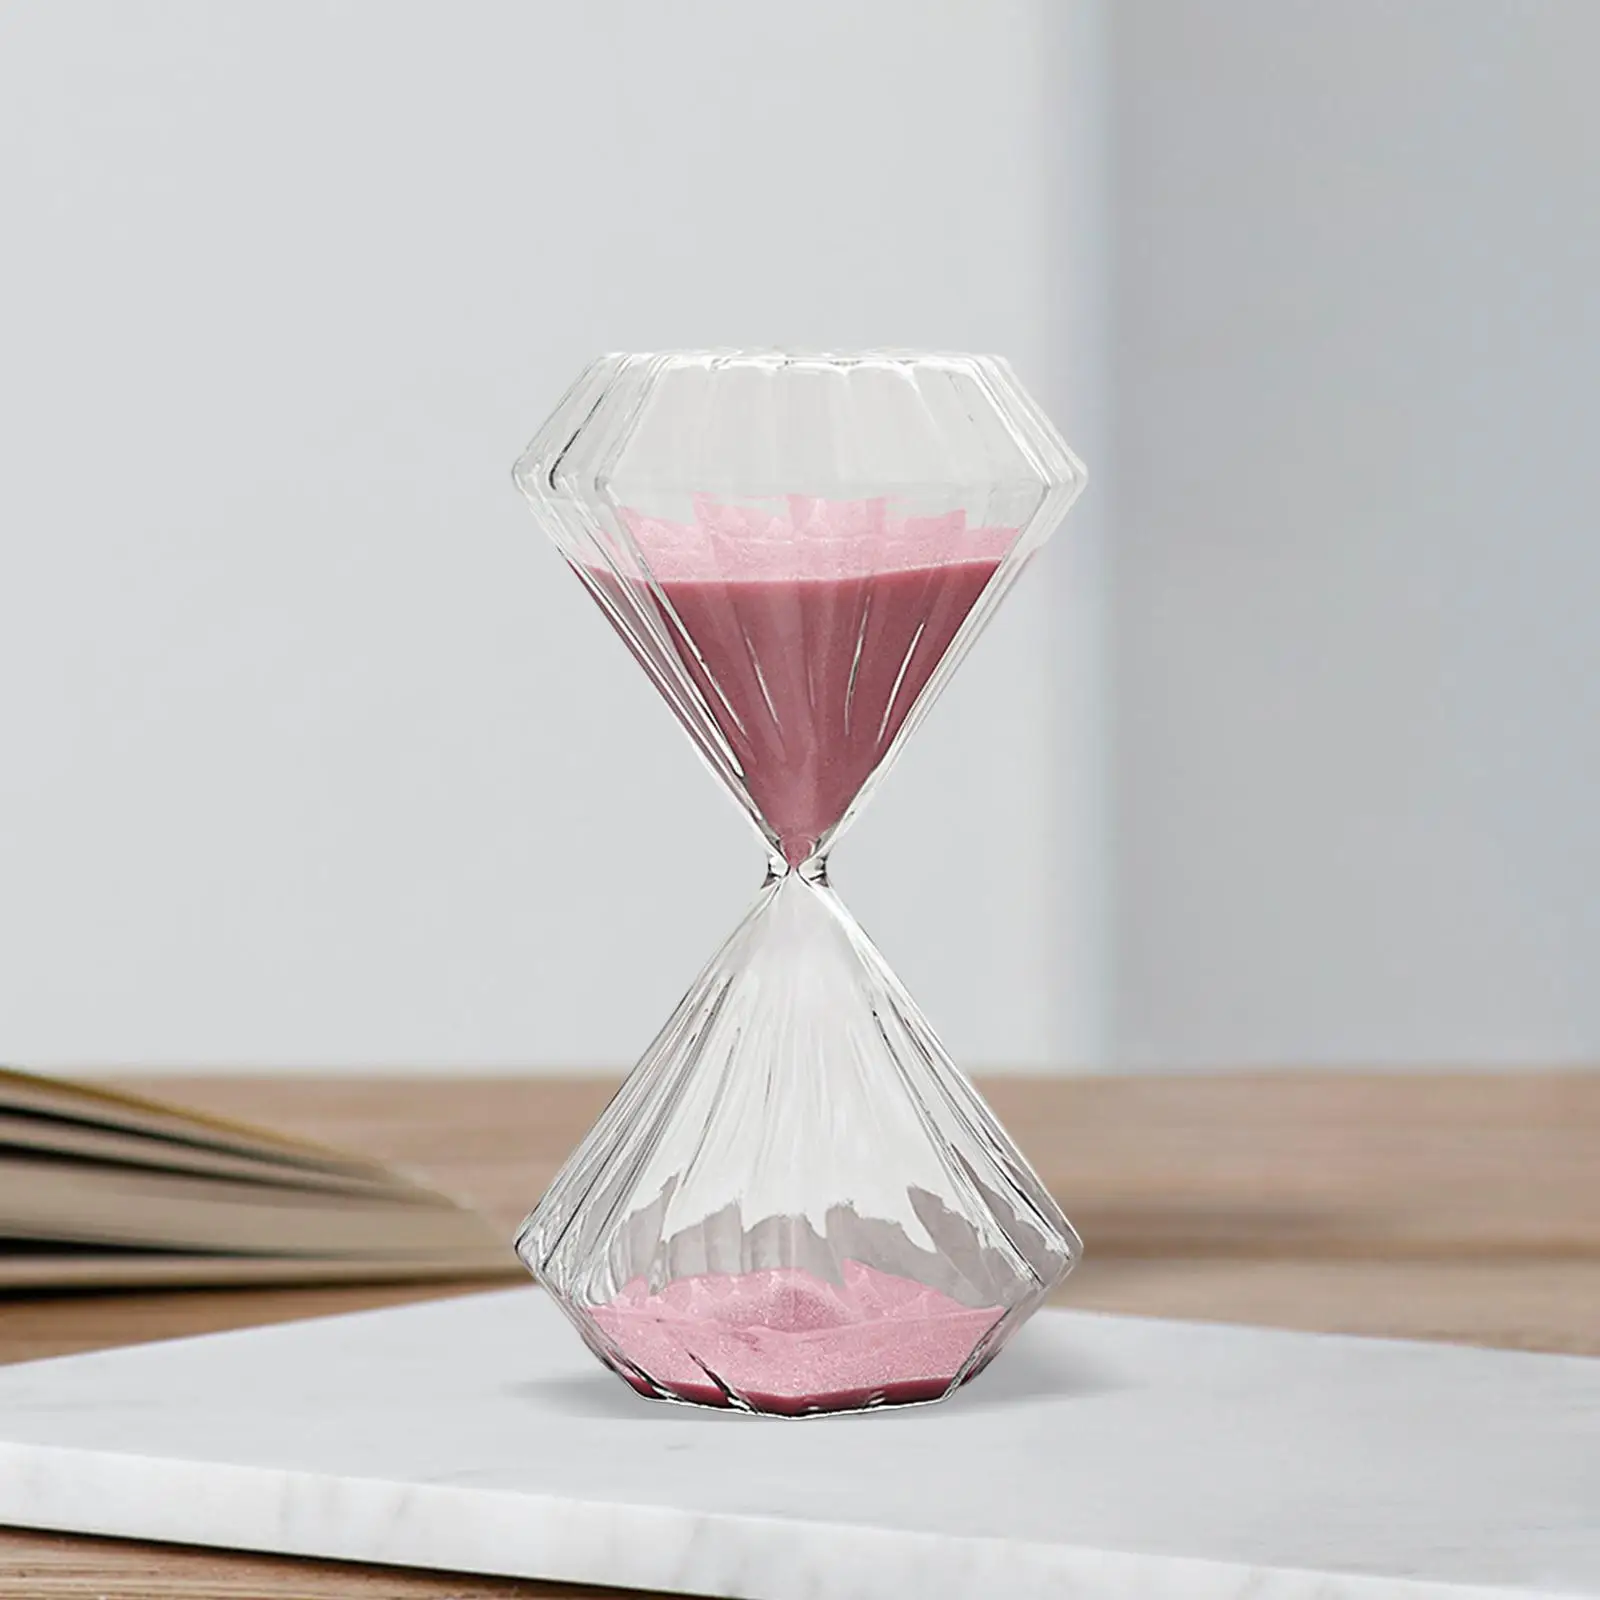 Sand Glass Timer Hourglass 30 Minutes Pink Sand Bathroom Accessory Decorative Study Timer Yoga Timer Hour Glasses for Bedroom